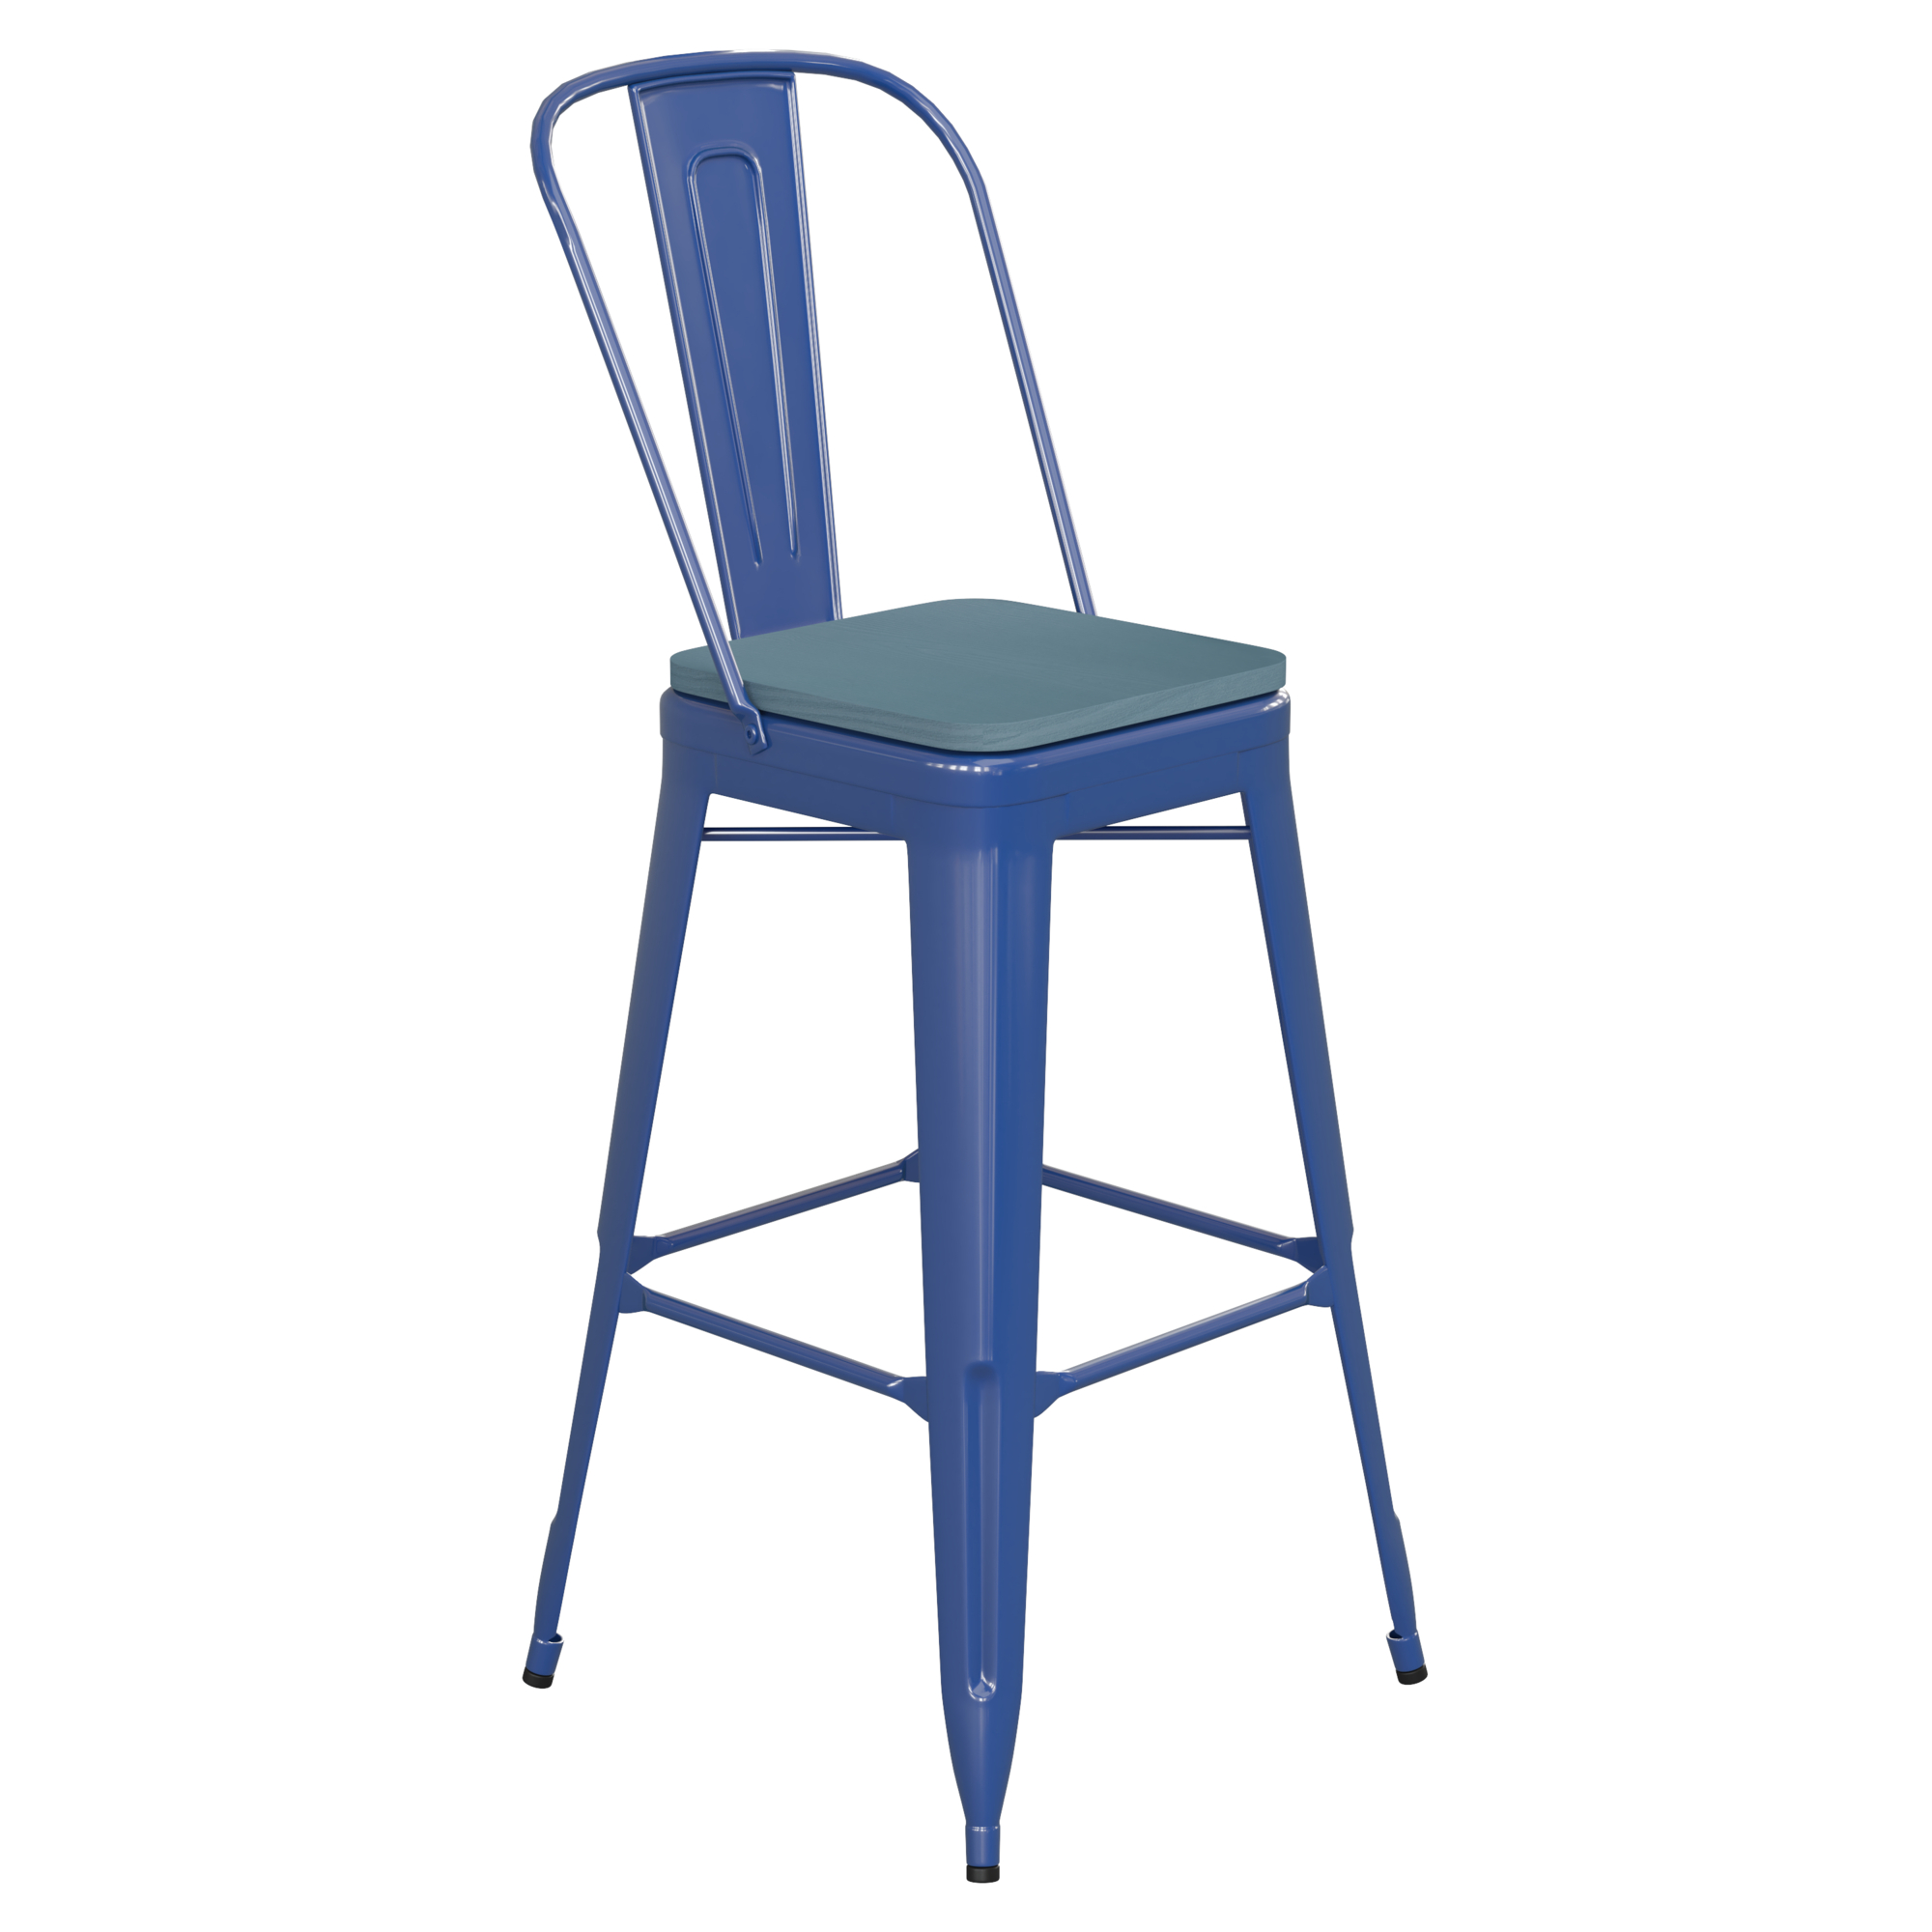 Flash Furniture, 30Inch Blue Metal Counter Stool-Teal Poly Seat, Primary Color Blue, Included (qty.) 1, Model CH3132030GBLP2C